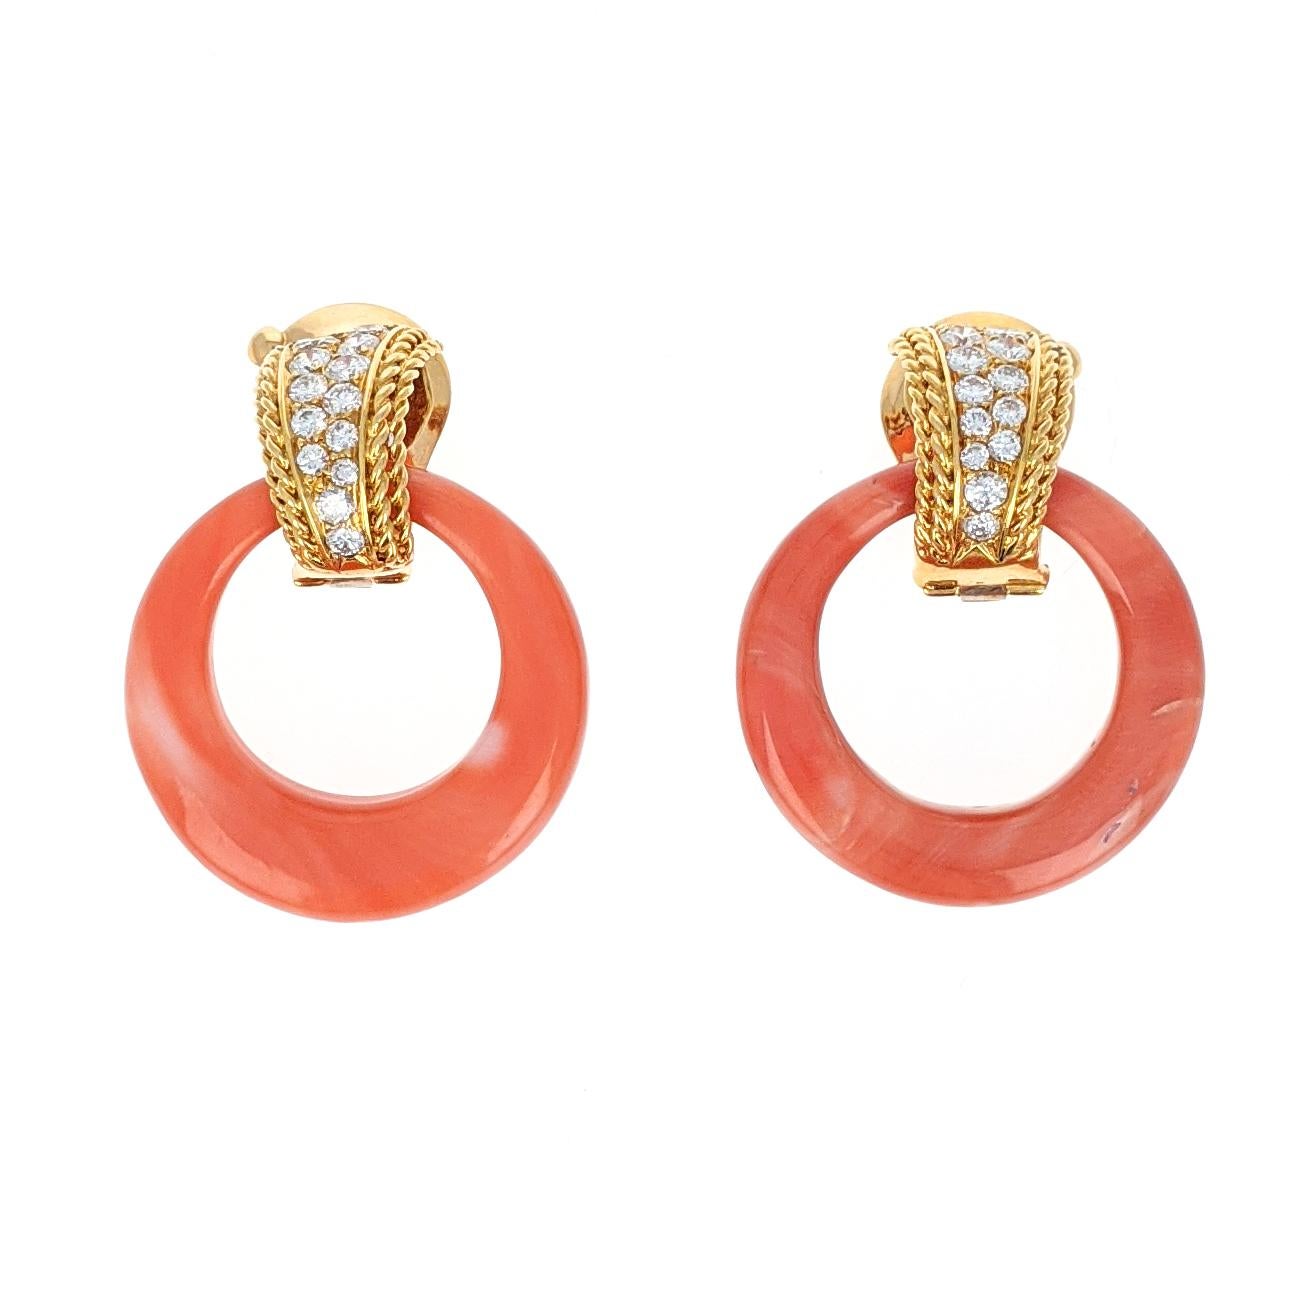 This lovely pair of ear clip earrings by Van Cleef and Arpels features two pieces of orangy-pink carved coral hoops suspended from 18 karat yellow gold clips. The clips are set with 26 round brilliant-cut diamonds with a total diamond weight of